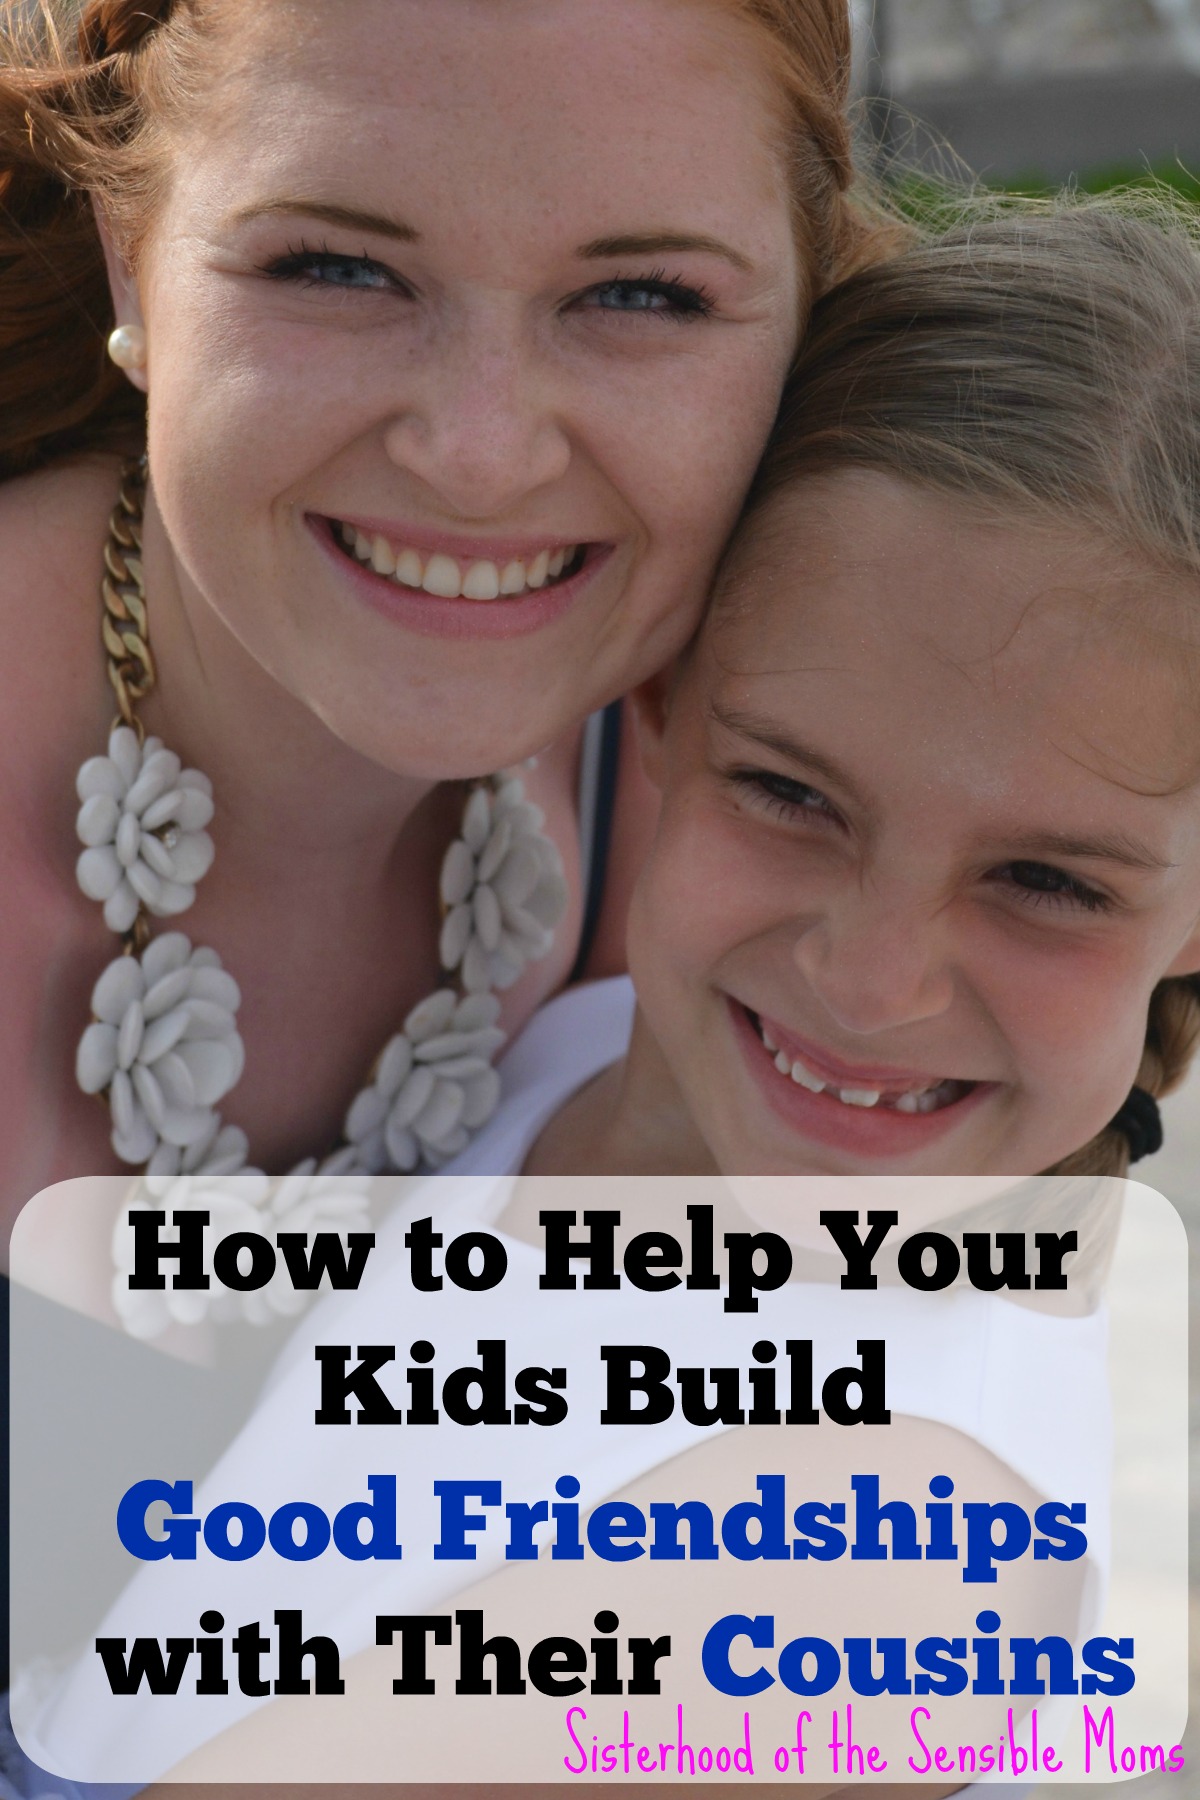 Want strong family bonds? How to help your kids build good friendships with their cousins | Sisterhood of the Sensible Moms